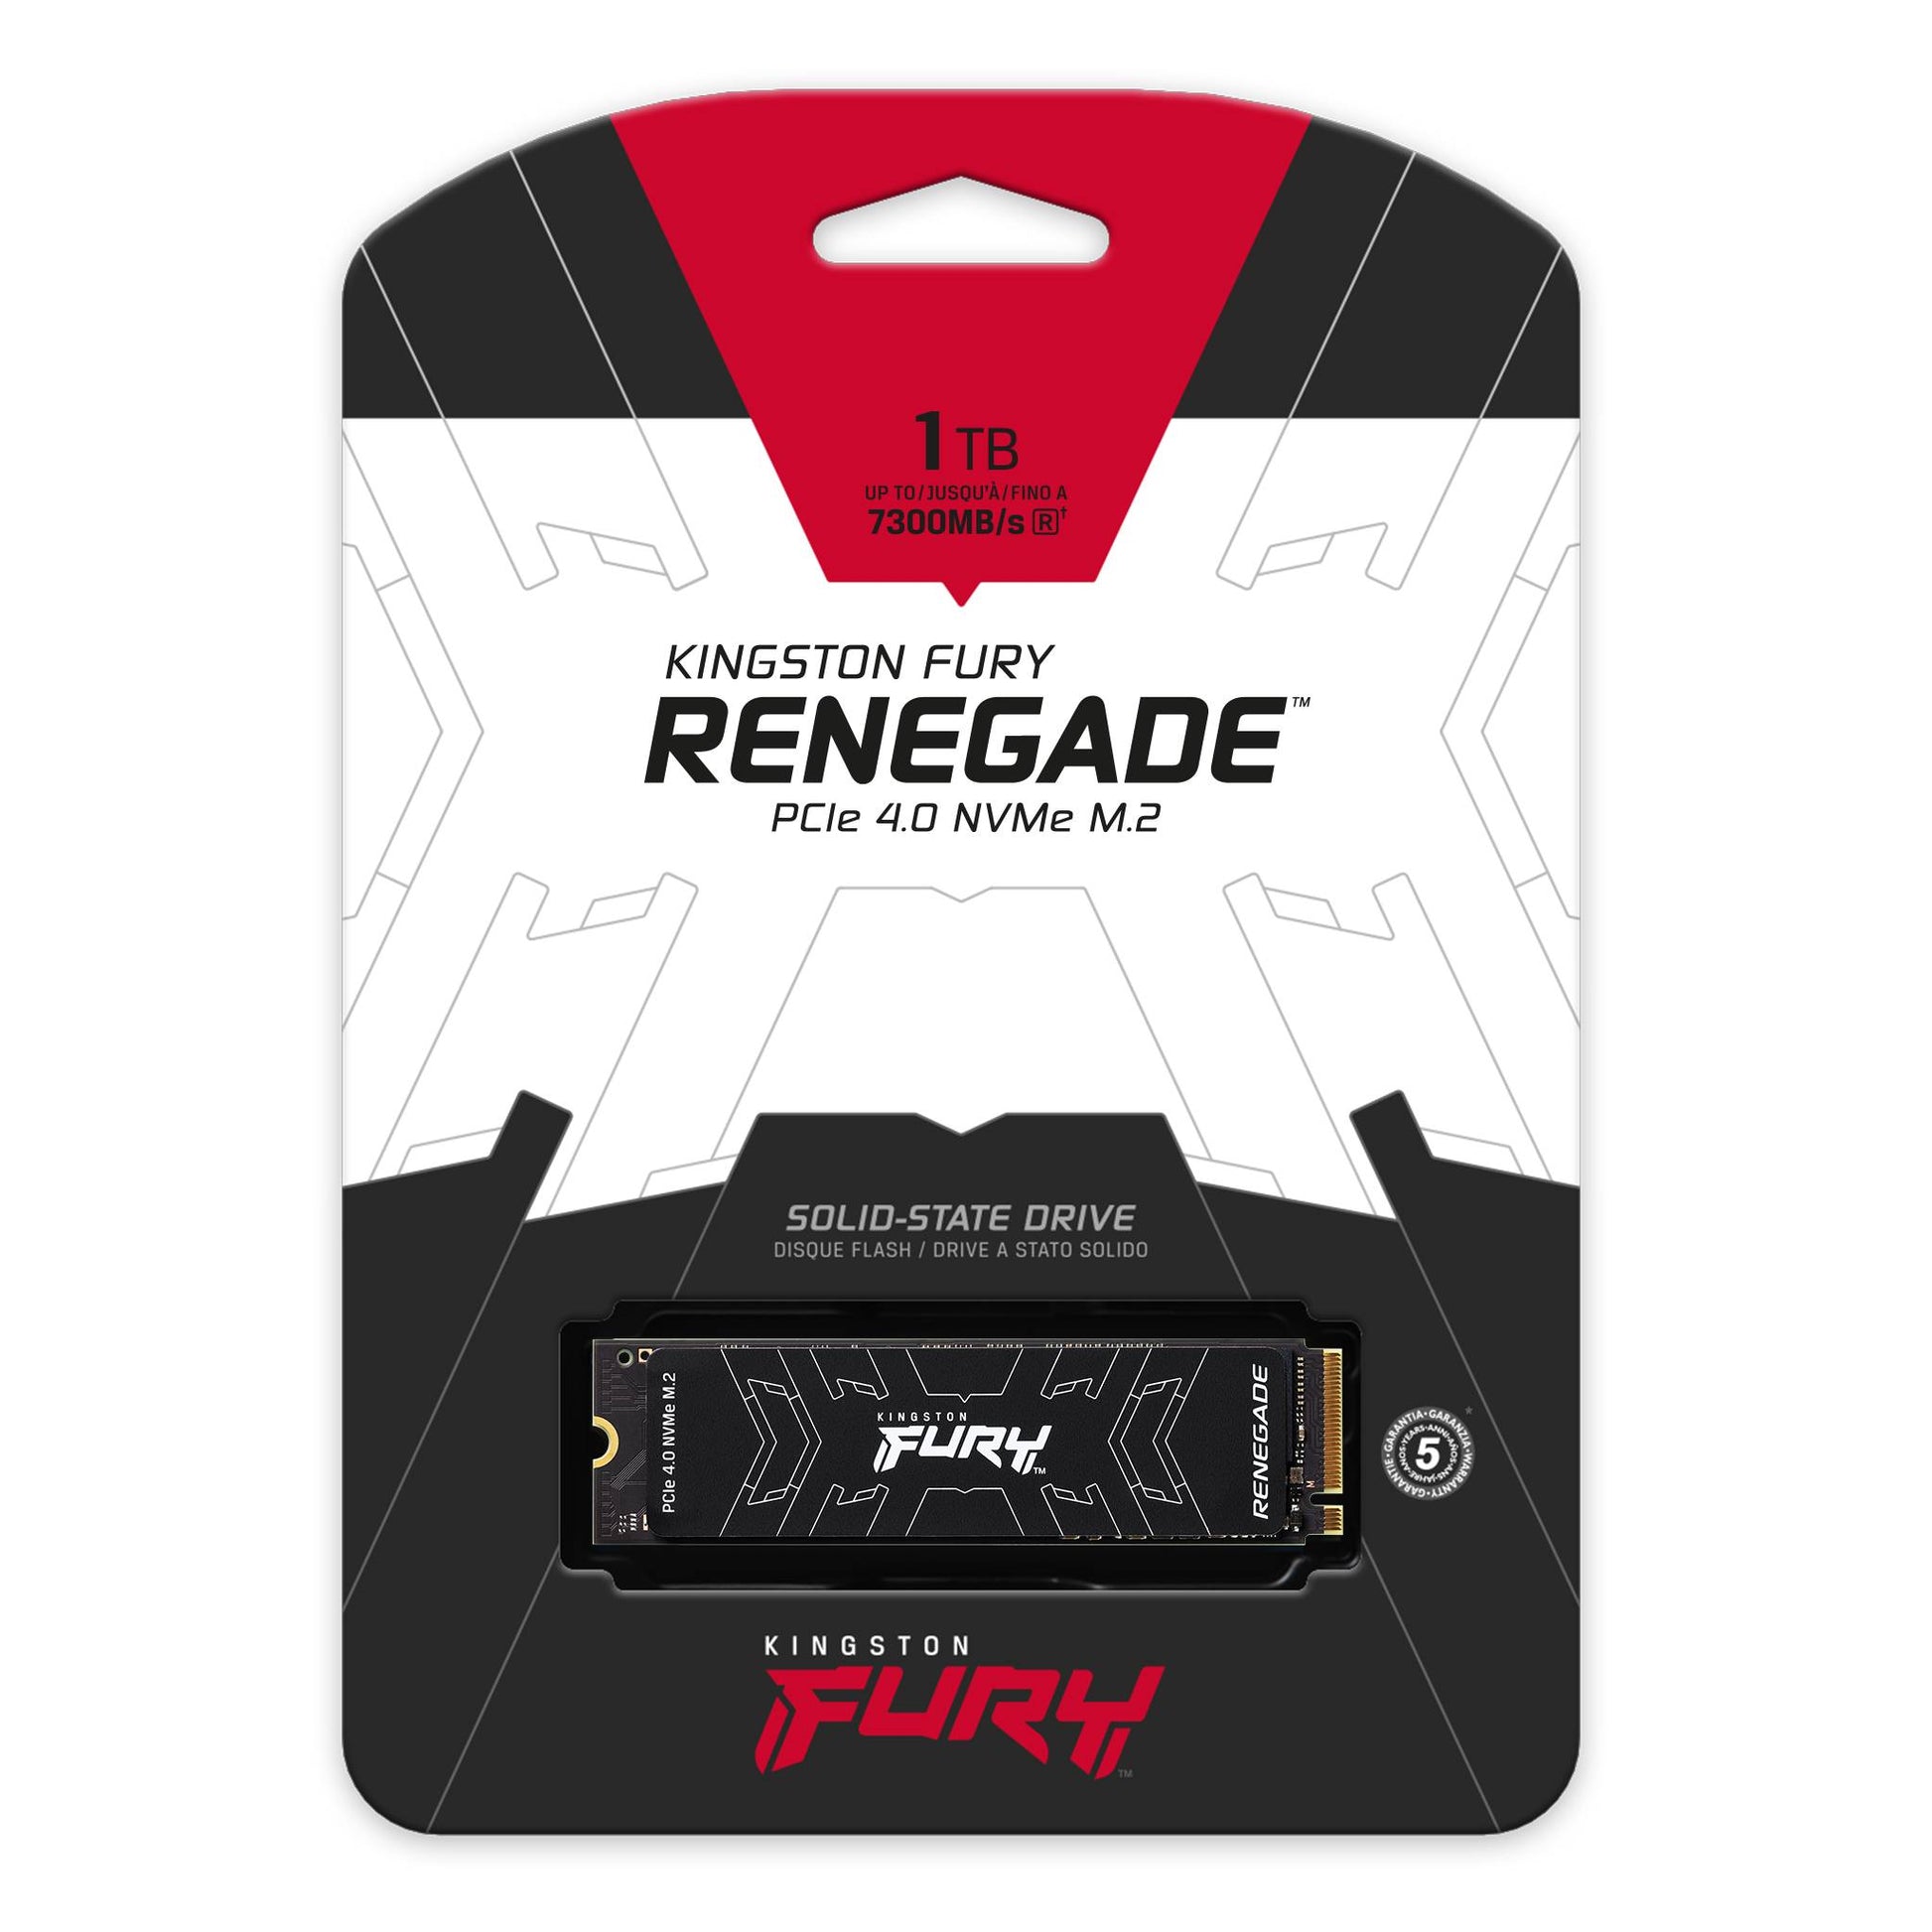 Kingston FURY Renegade 1TB PCIe 4.0 NVMe M.2 SSD up to 7,300MB/s photo 